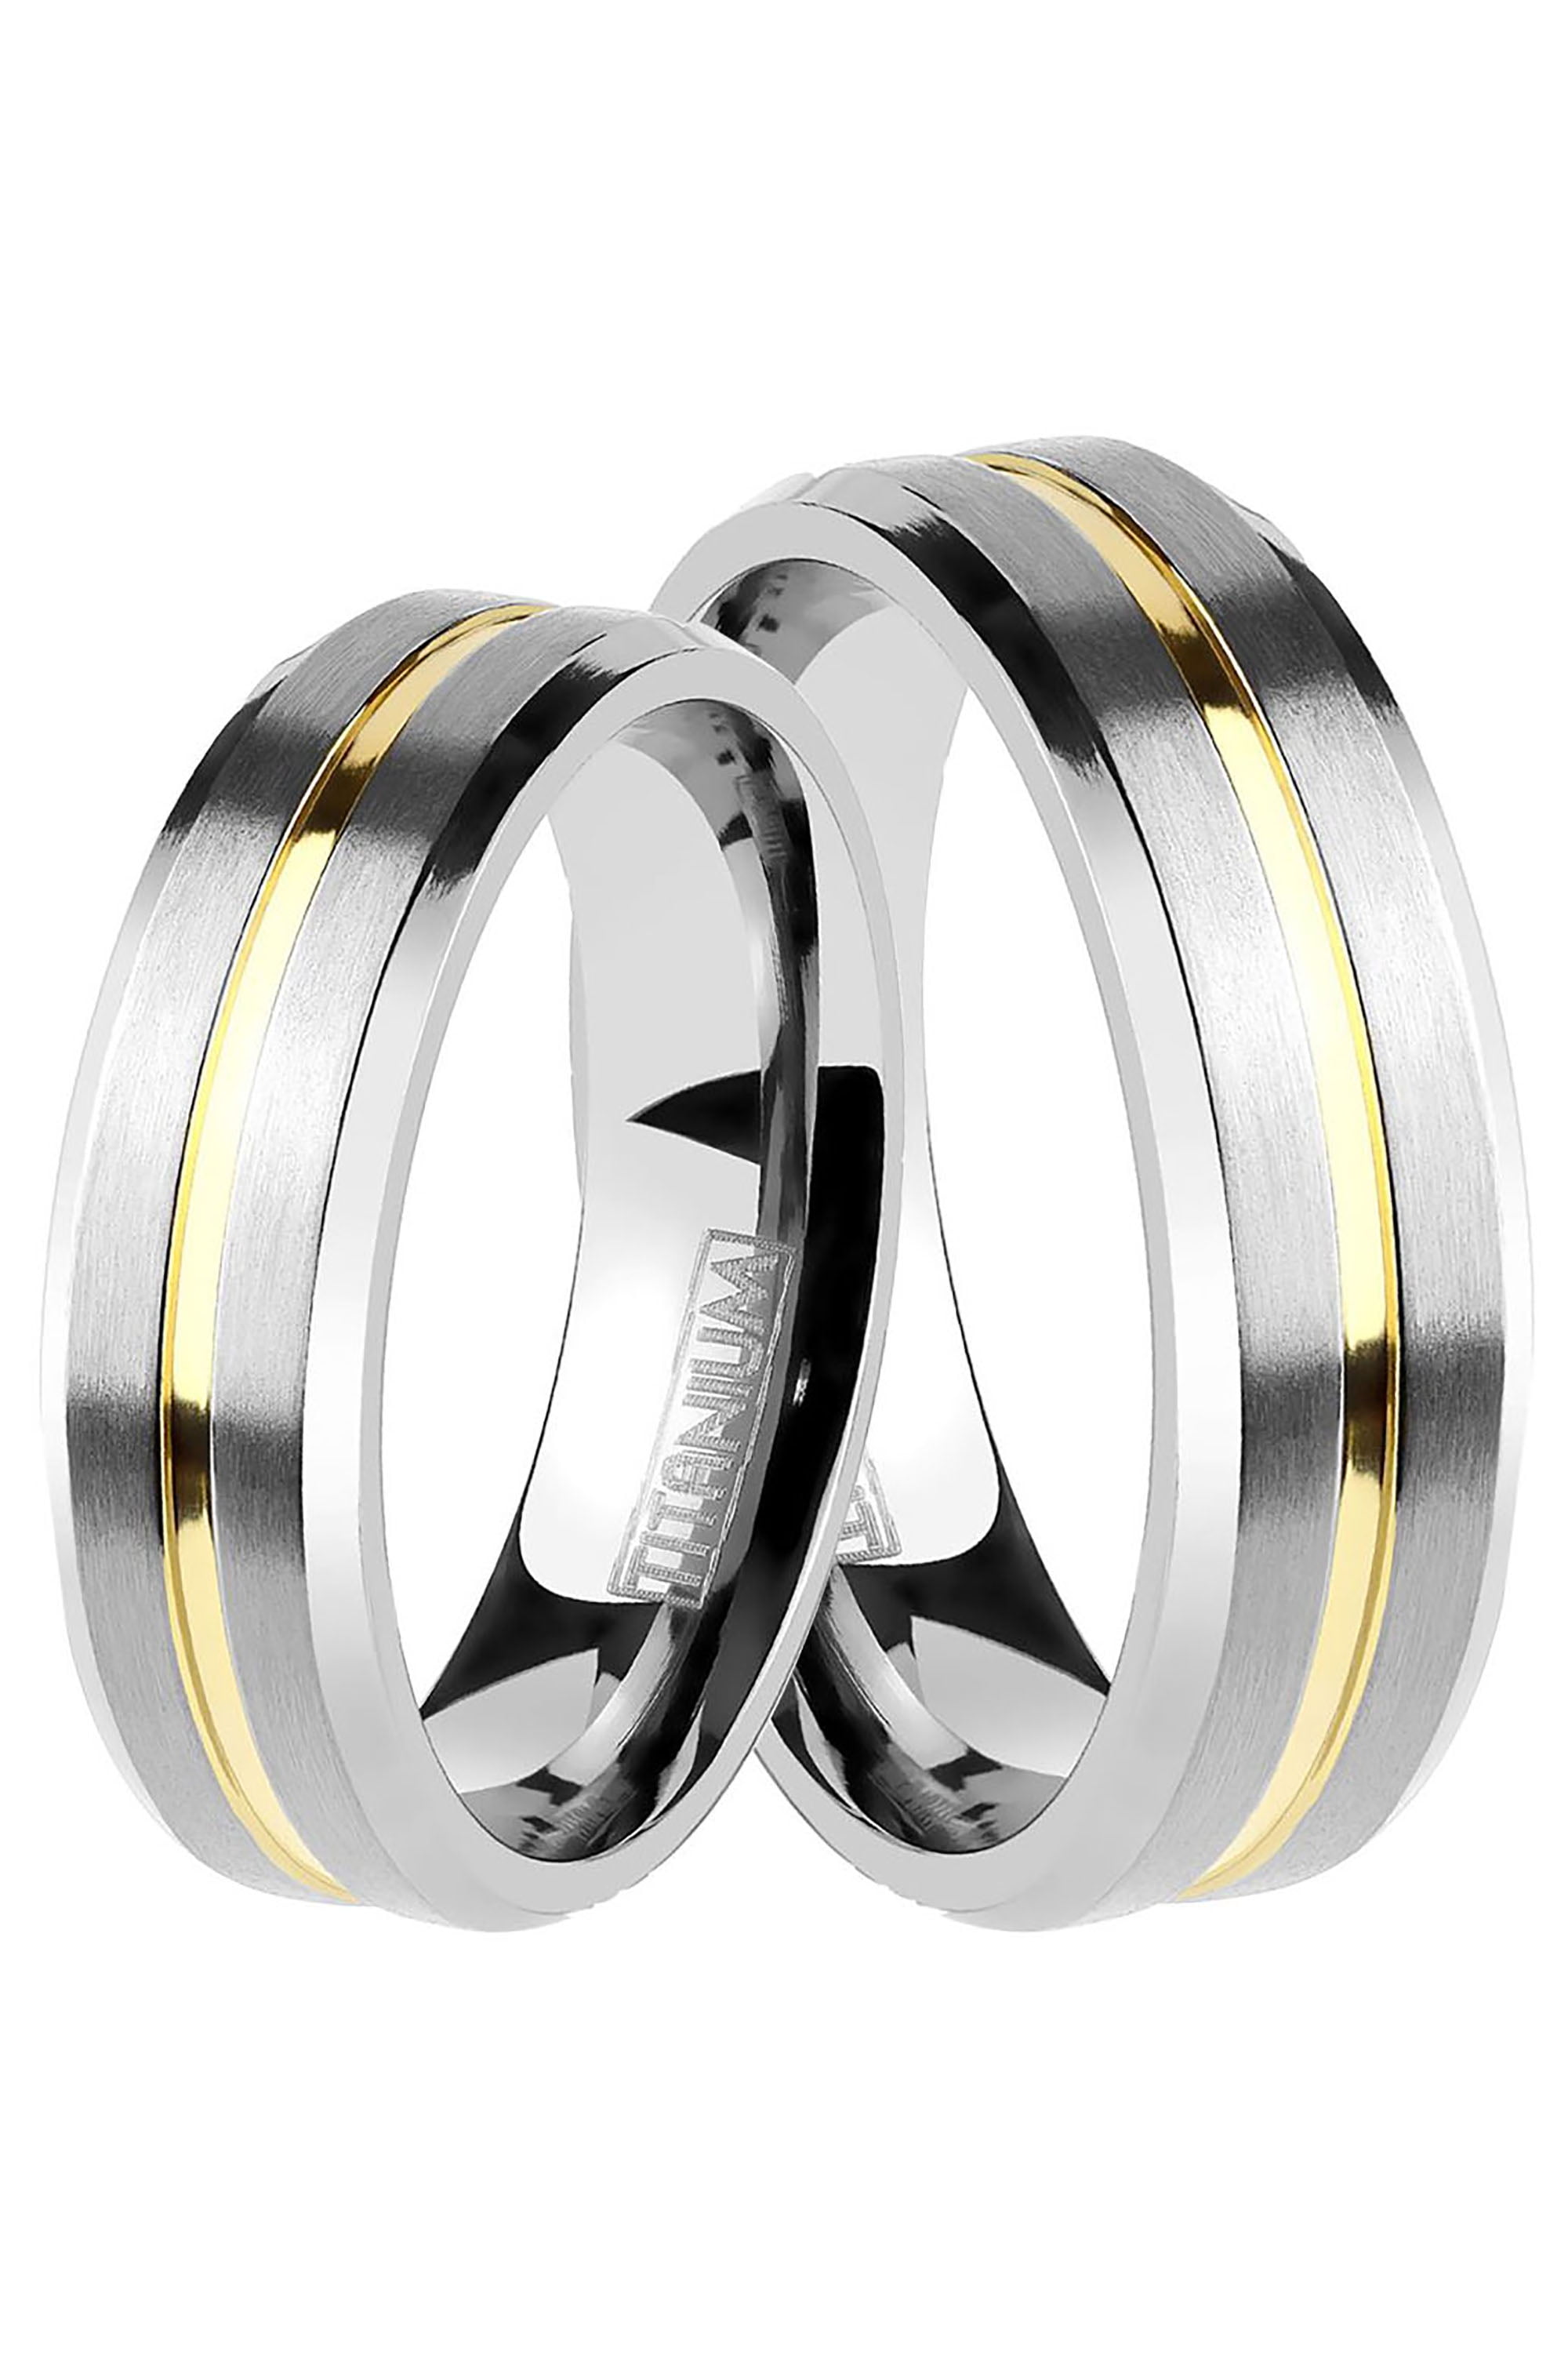 LaRaso & Co - His and Hers Titanium Wedding Rings Bands Set for Him ...